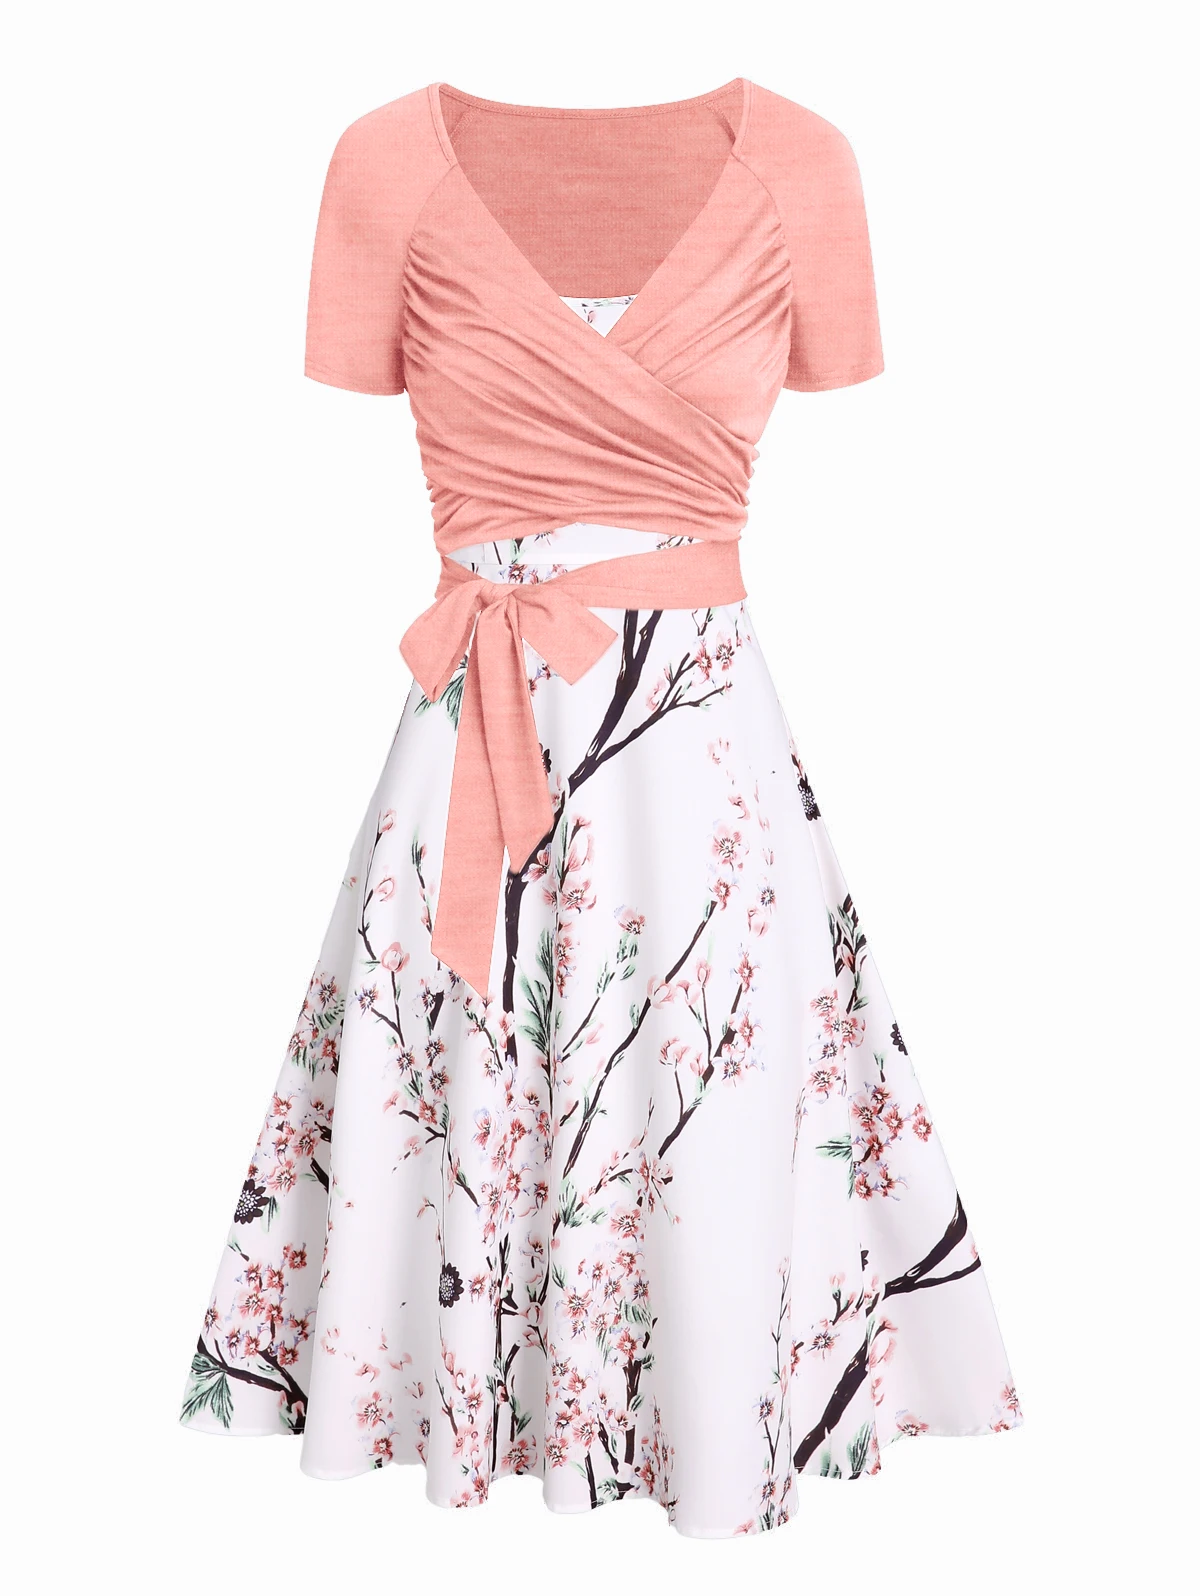 

Spring New Flower Leaf Print Midi Cami Dress And Long Sleeve Heather Crossover Tied Cropped Top Outfit Vestidos De Fiesta